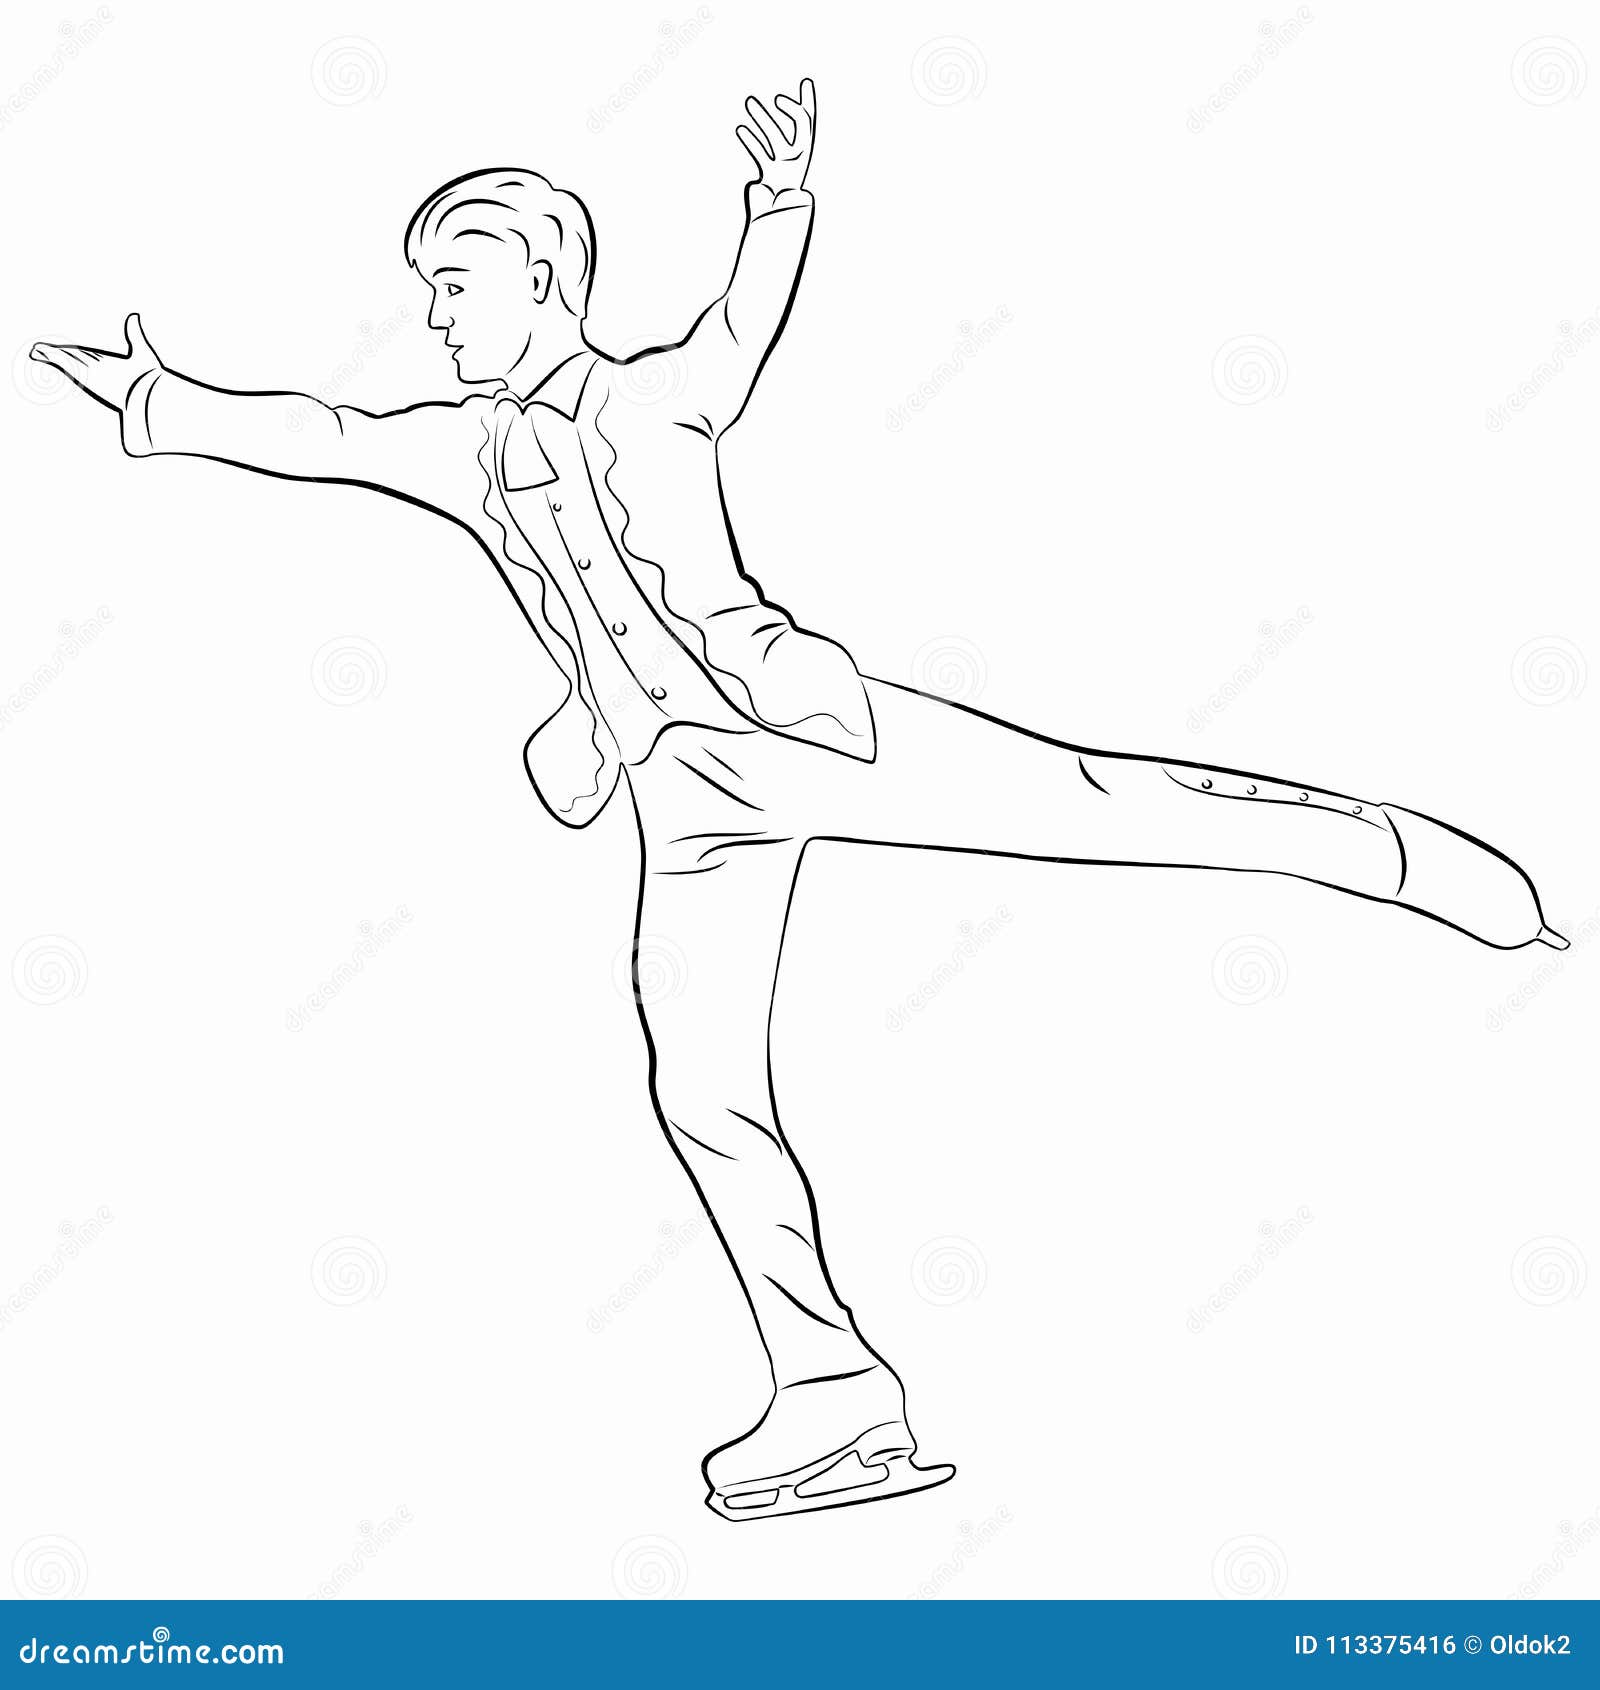 3dRose db794451 Figure Skater Silhouette Skating on A Frozen Pond in A  Beautiful Winter Snow SceneDrawing Book 8 by 8Inch  Amazonin Office  Products